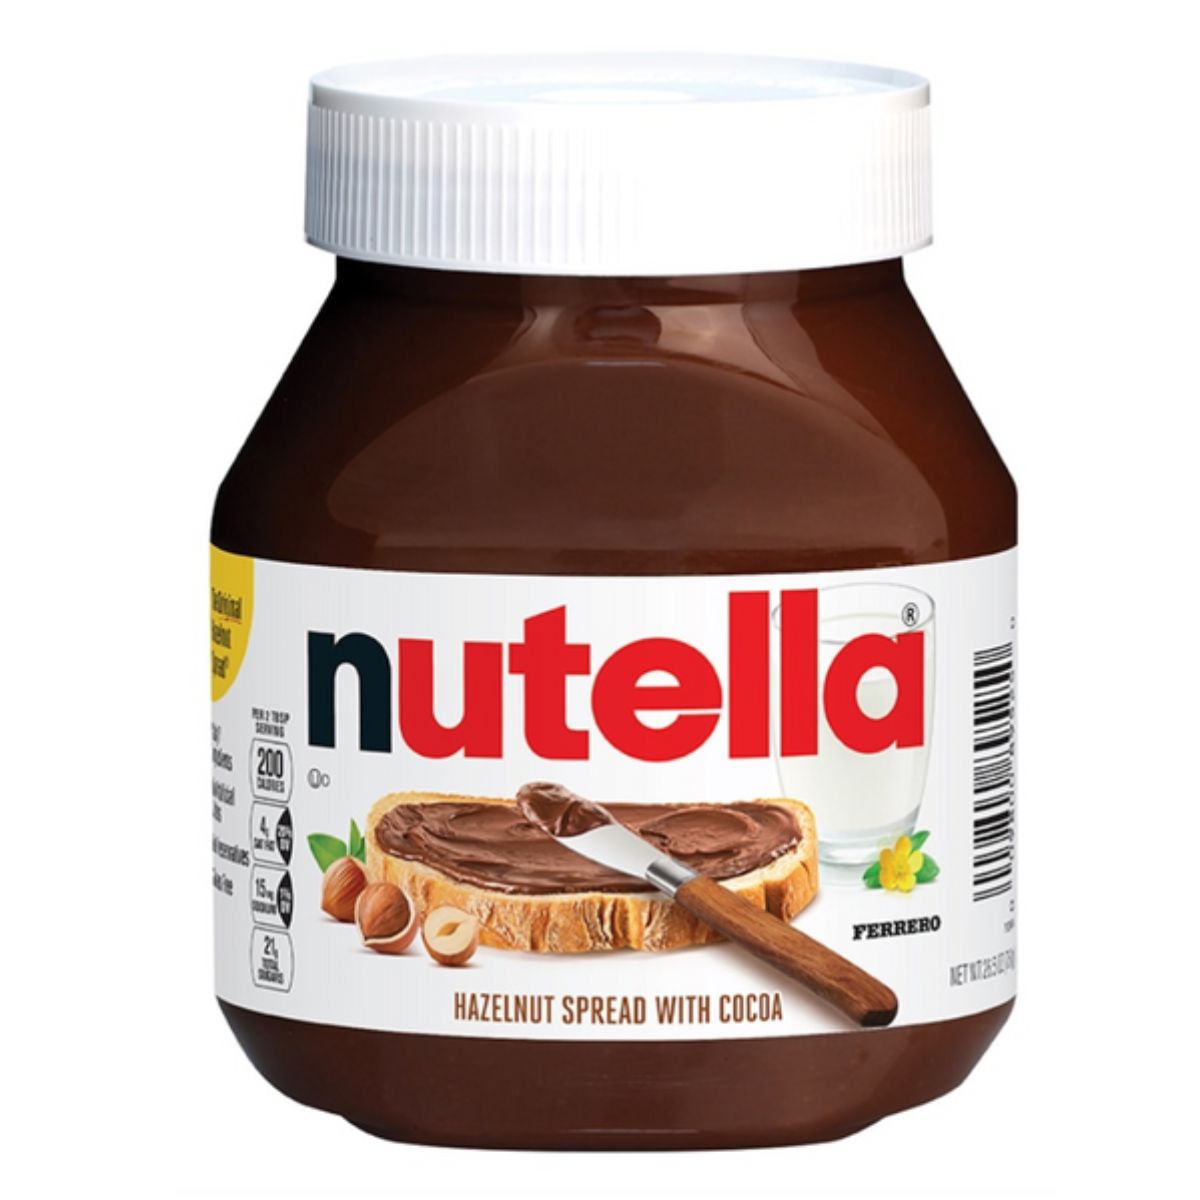 A jar of Nutella - Hazelnut Spread with Cocoa - 950g on a white background.